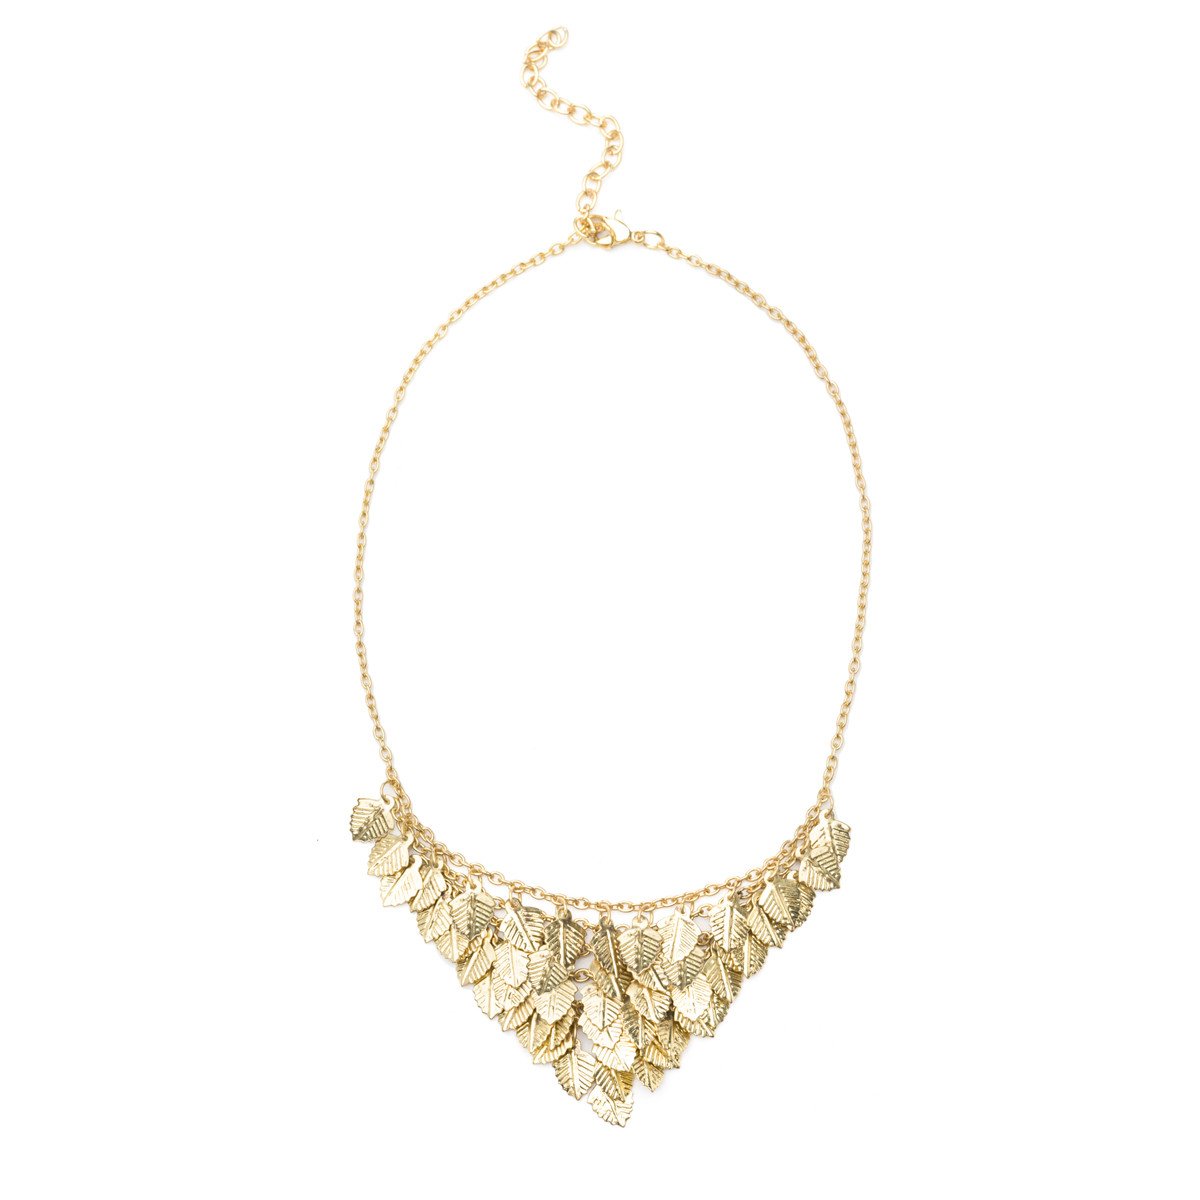 Falling Leaves Necklace - Gold